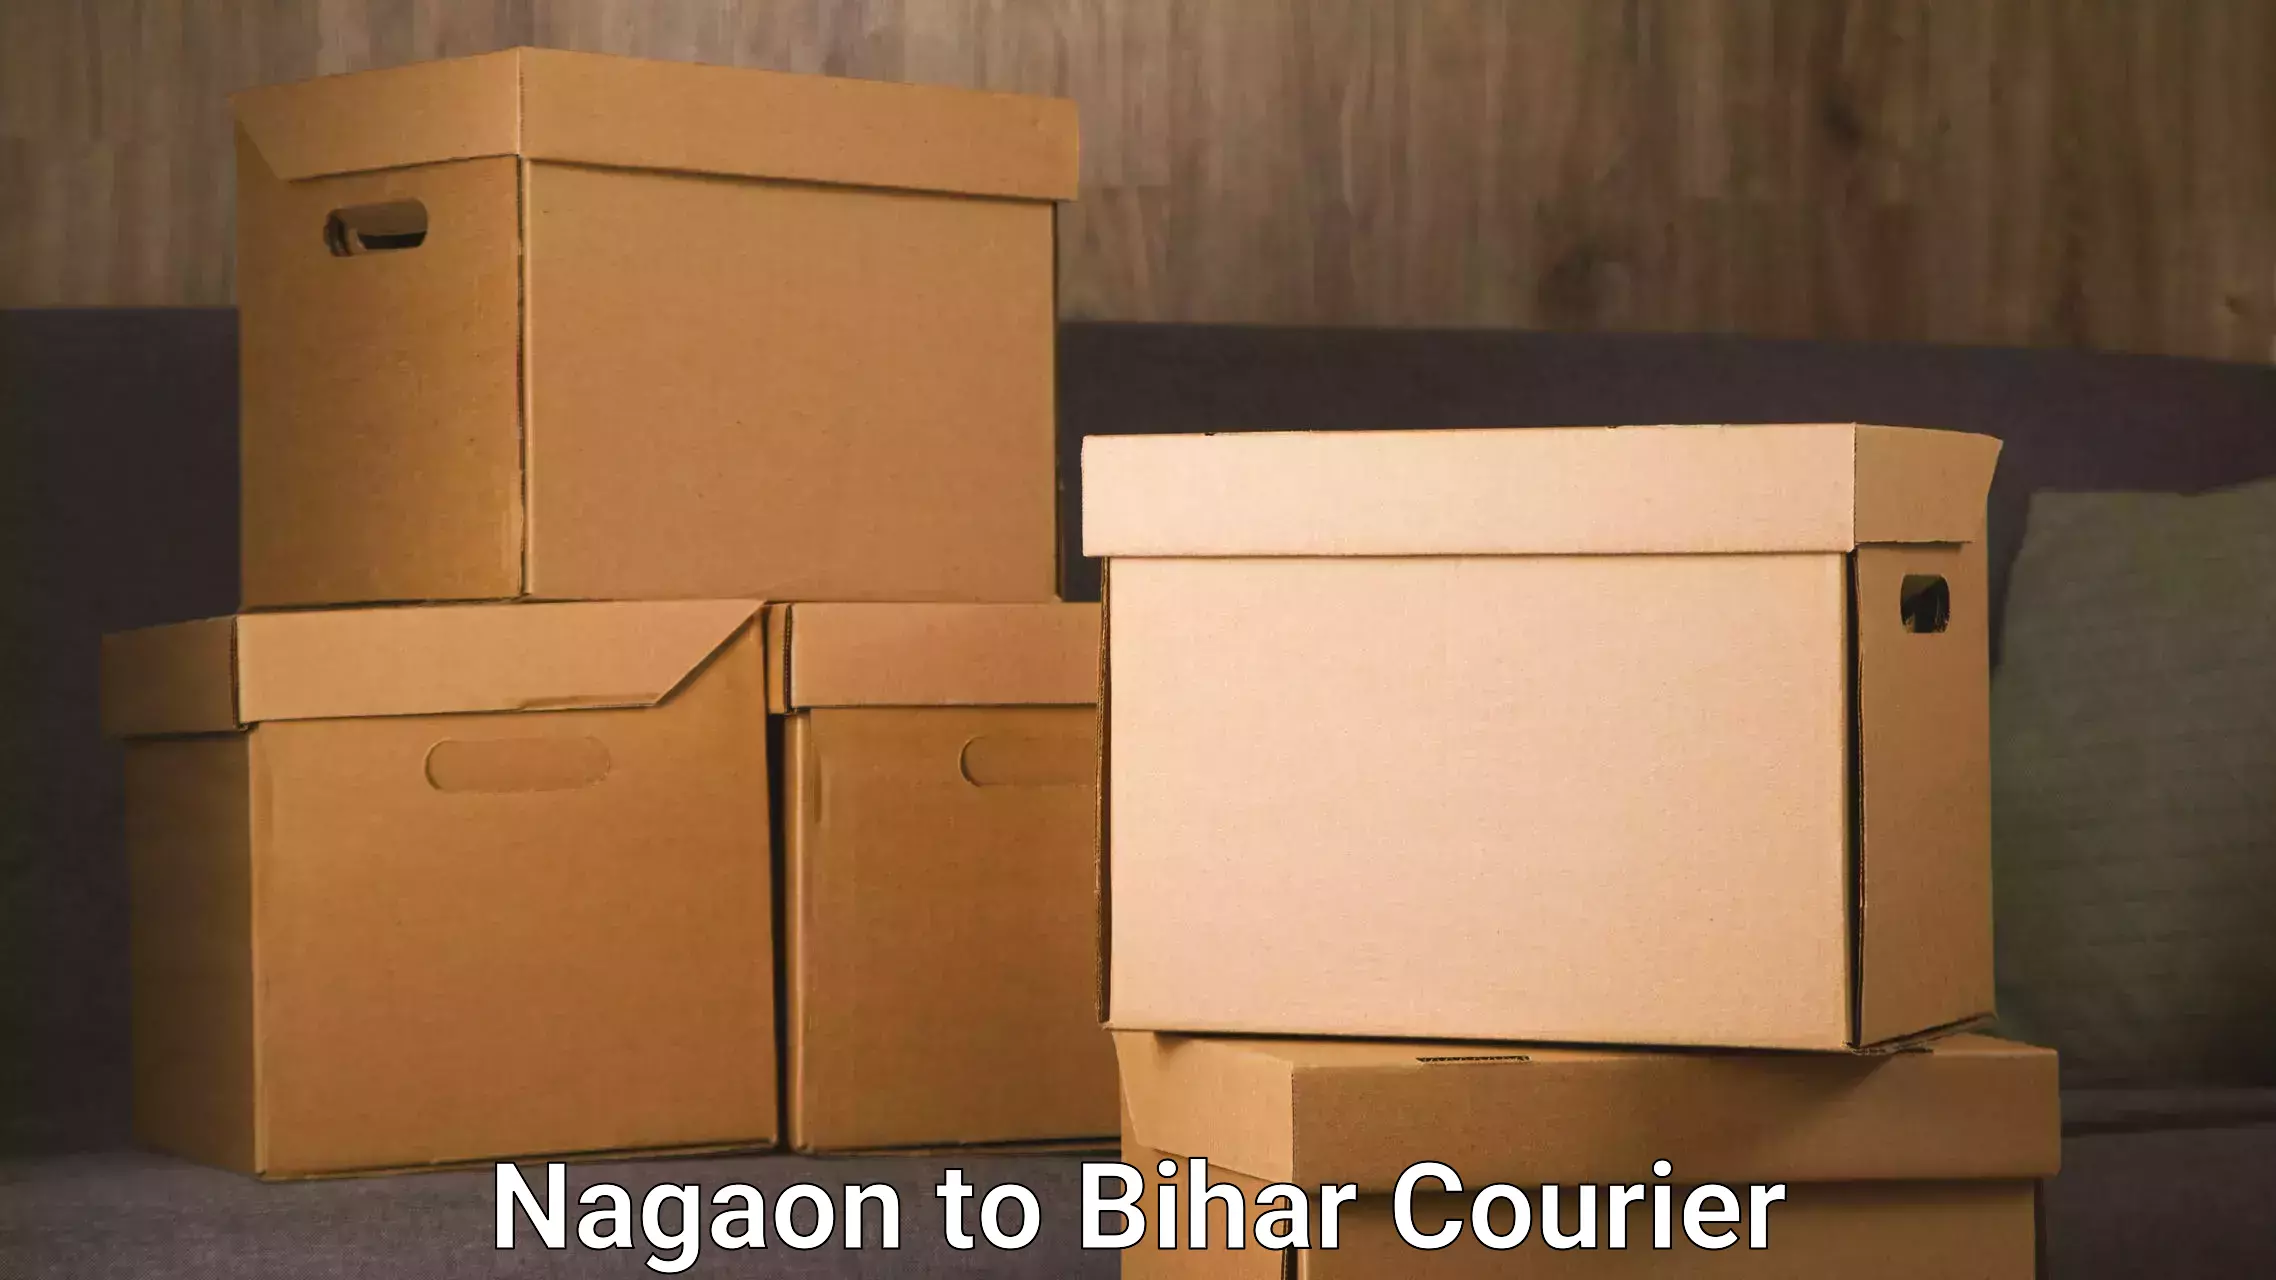 Cash on delivery service Nagaon to Marhowrah